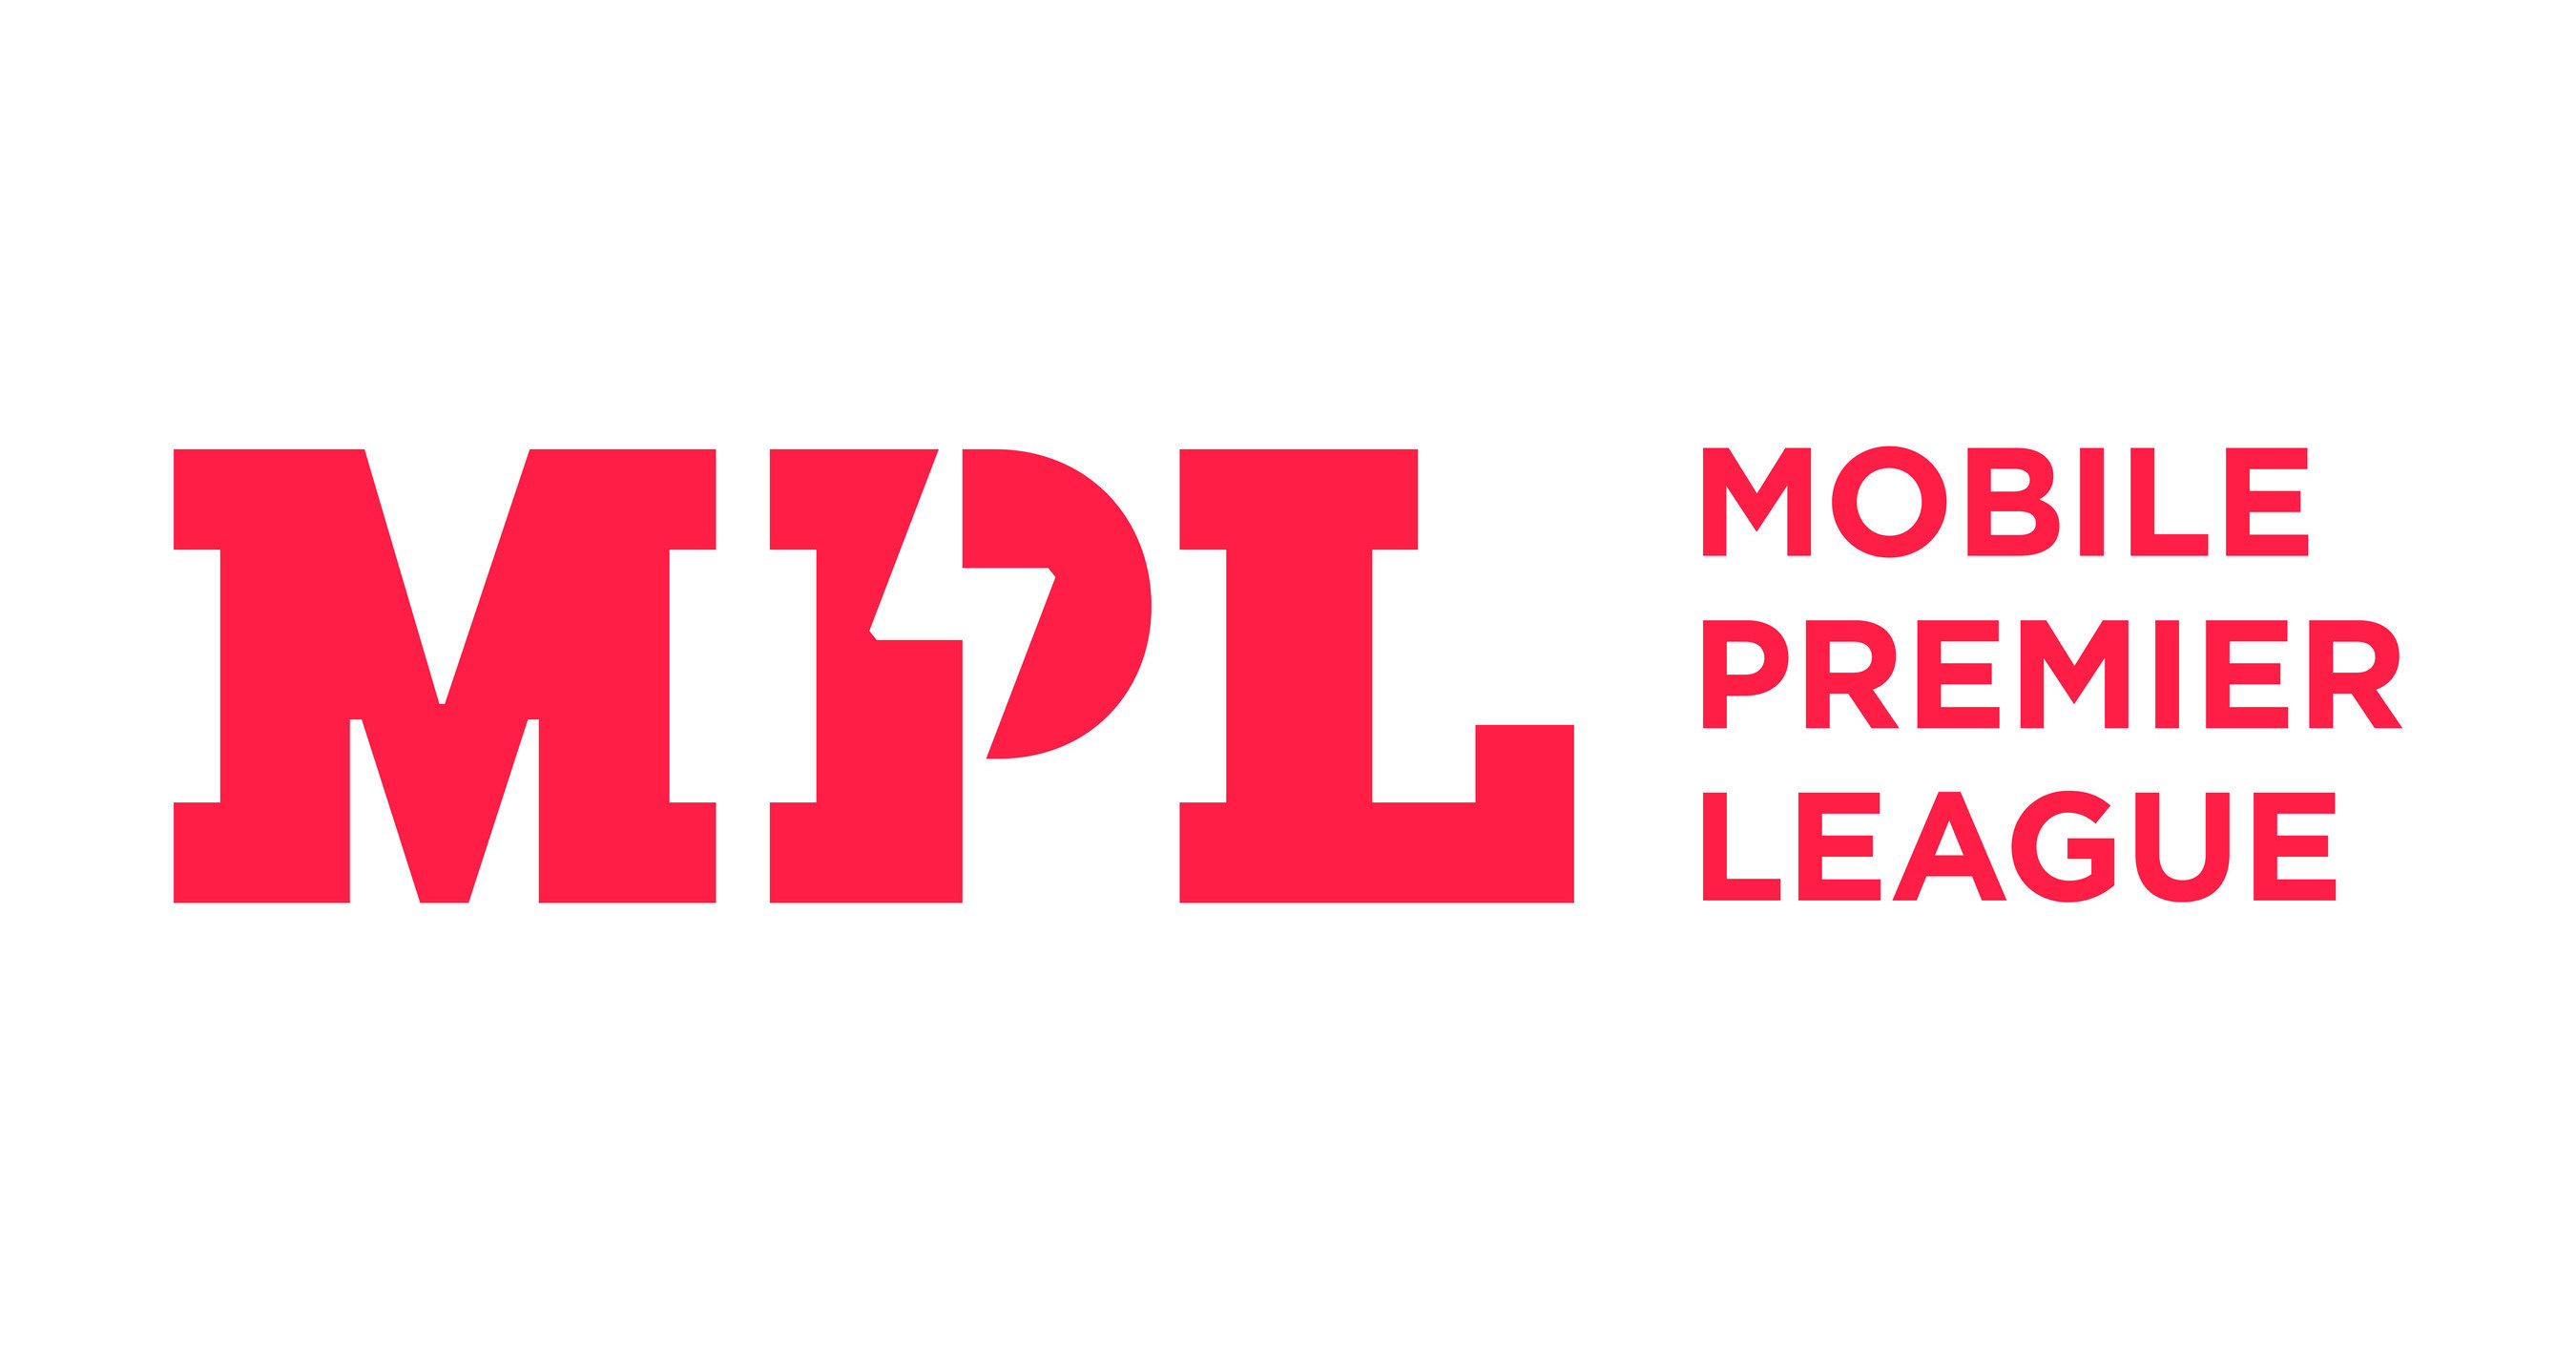 Mobile Premier League Launches Gaming Super App in the U.S.